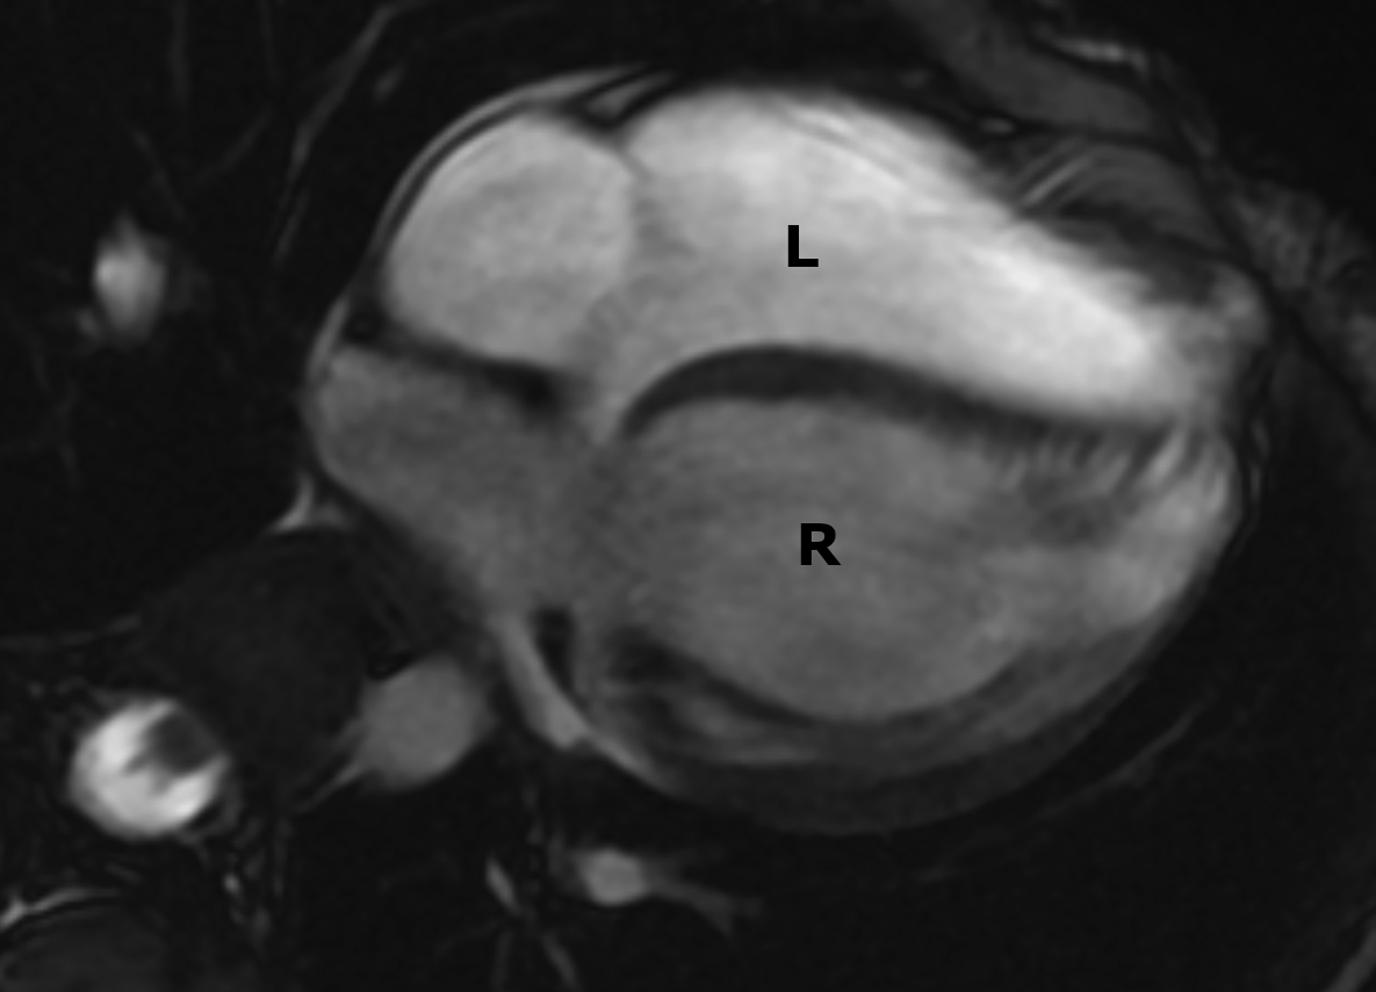 Figure 4-3, Balanced steady-state free precession (bSSFP) bright-blood four-chamber image in a child with congenitally corrected (L-) transposition of the great arteries (L-TGA) shows the morphologic left ventricle ( L ) anterior and to the right of the morphologic right ventricle ( R ). Such images through the heart can be obtained in cine mode and are used to evaluate cardiac motion and functional parameters, such as ventricular ejection fraction.